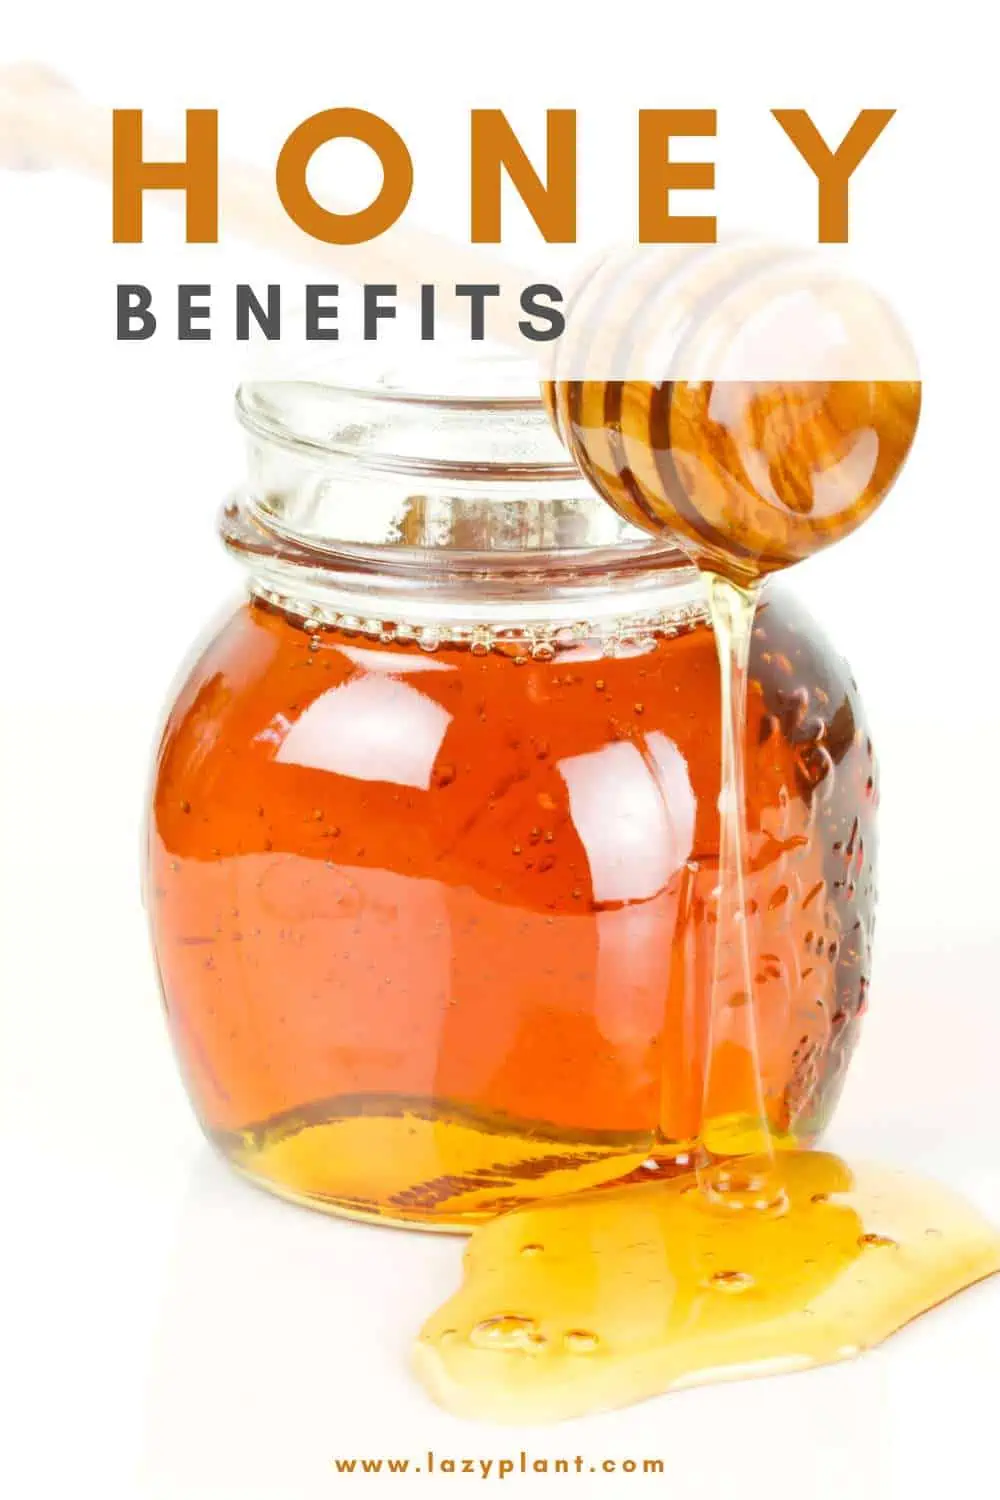 Honey is one of the richest foods in antioxidants.